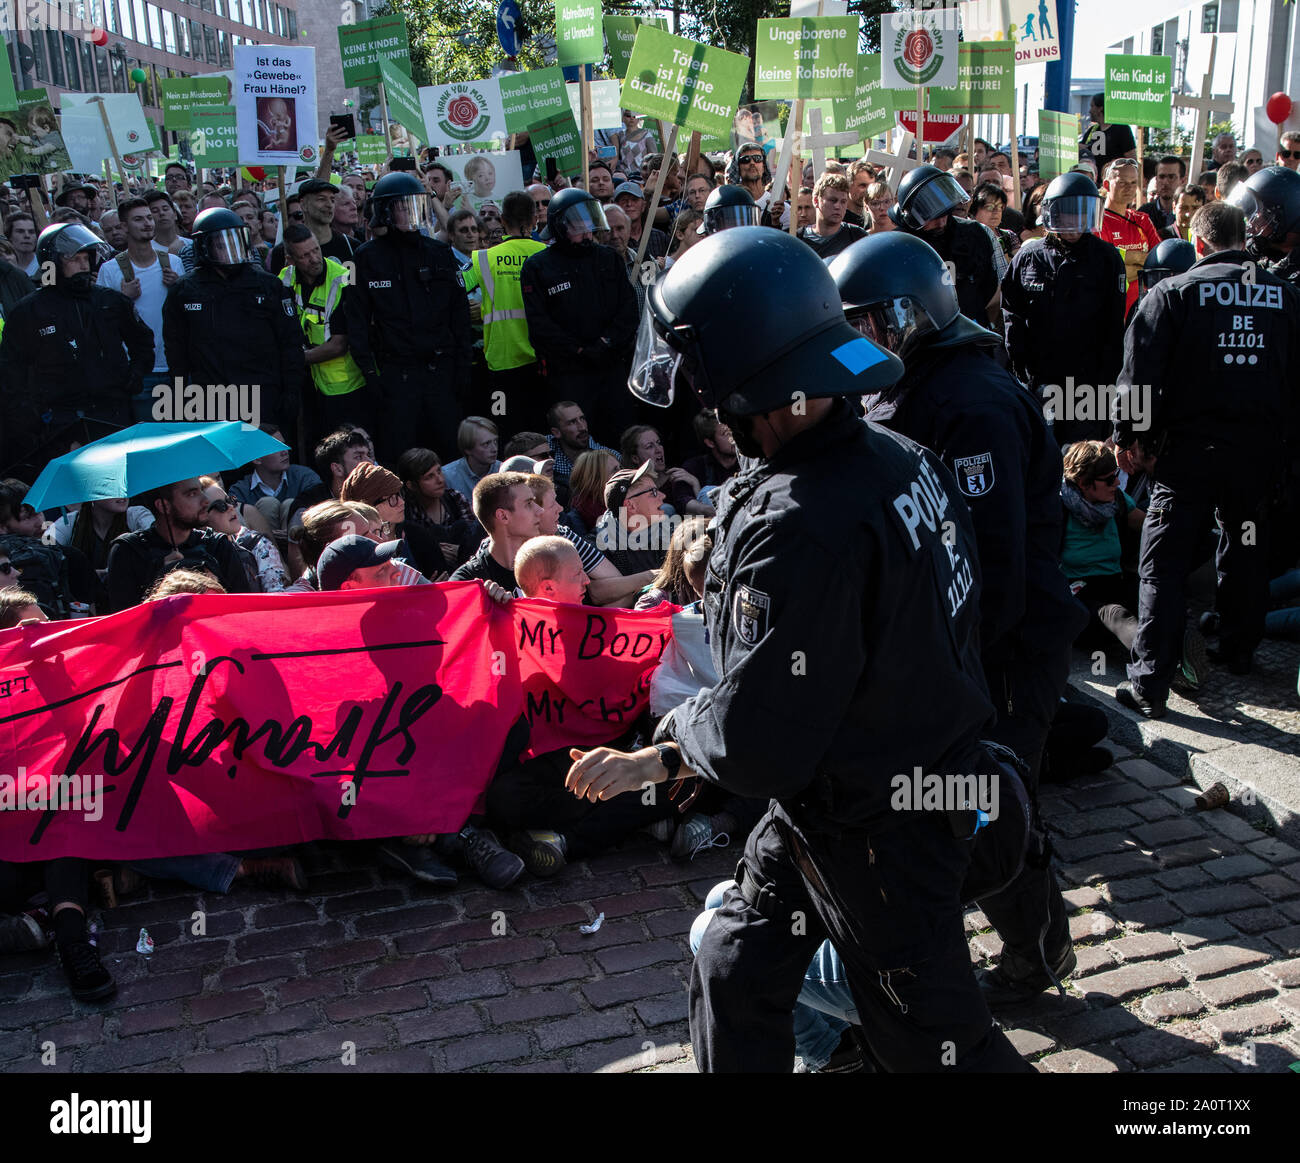 Berlin, Germany. 21st Sep, 2019. Police officers remove a participant of the counter-demonstration after the so-called 'march for life' became a sit-in blockade. According to the organizer, the association Bundesverband Lebensrecht, the Catholic Church, as well as doctors' and lawyers' associations participated in the 'March for Life'. Hundreds of people demonstrated in Berlin-Mitte against the demonstration of anti-abortion activists. Credit: Paul Zinken/dpa/Alamy Live News Stock Photo